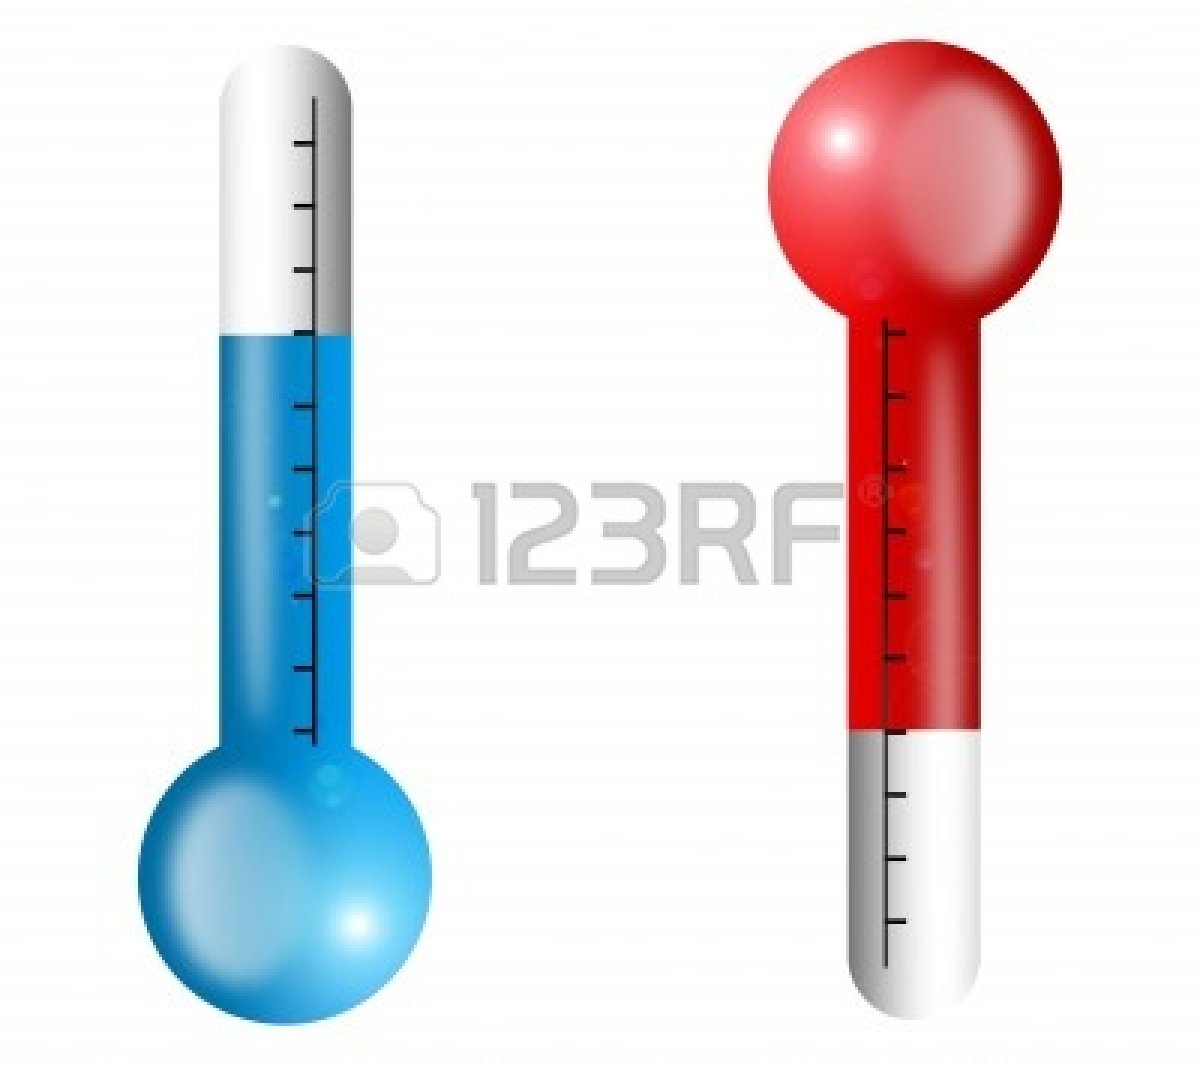 And Cold Thermometer Clip Art   Clipart Panda   Free Clipart Images